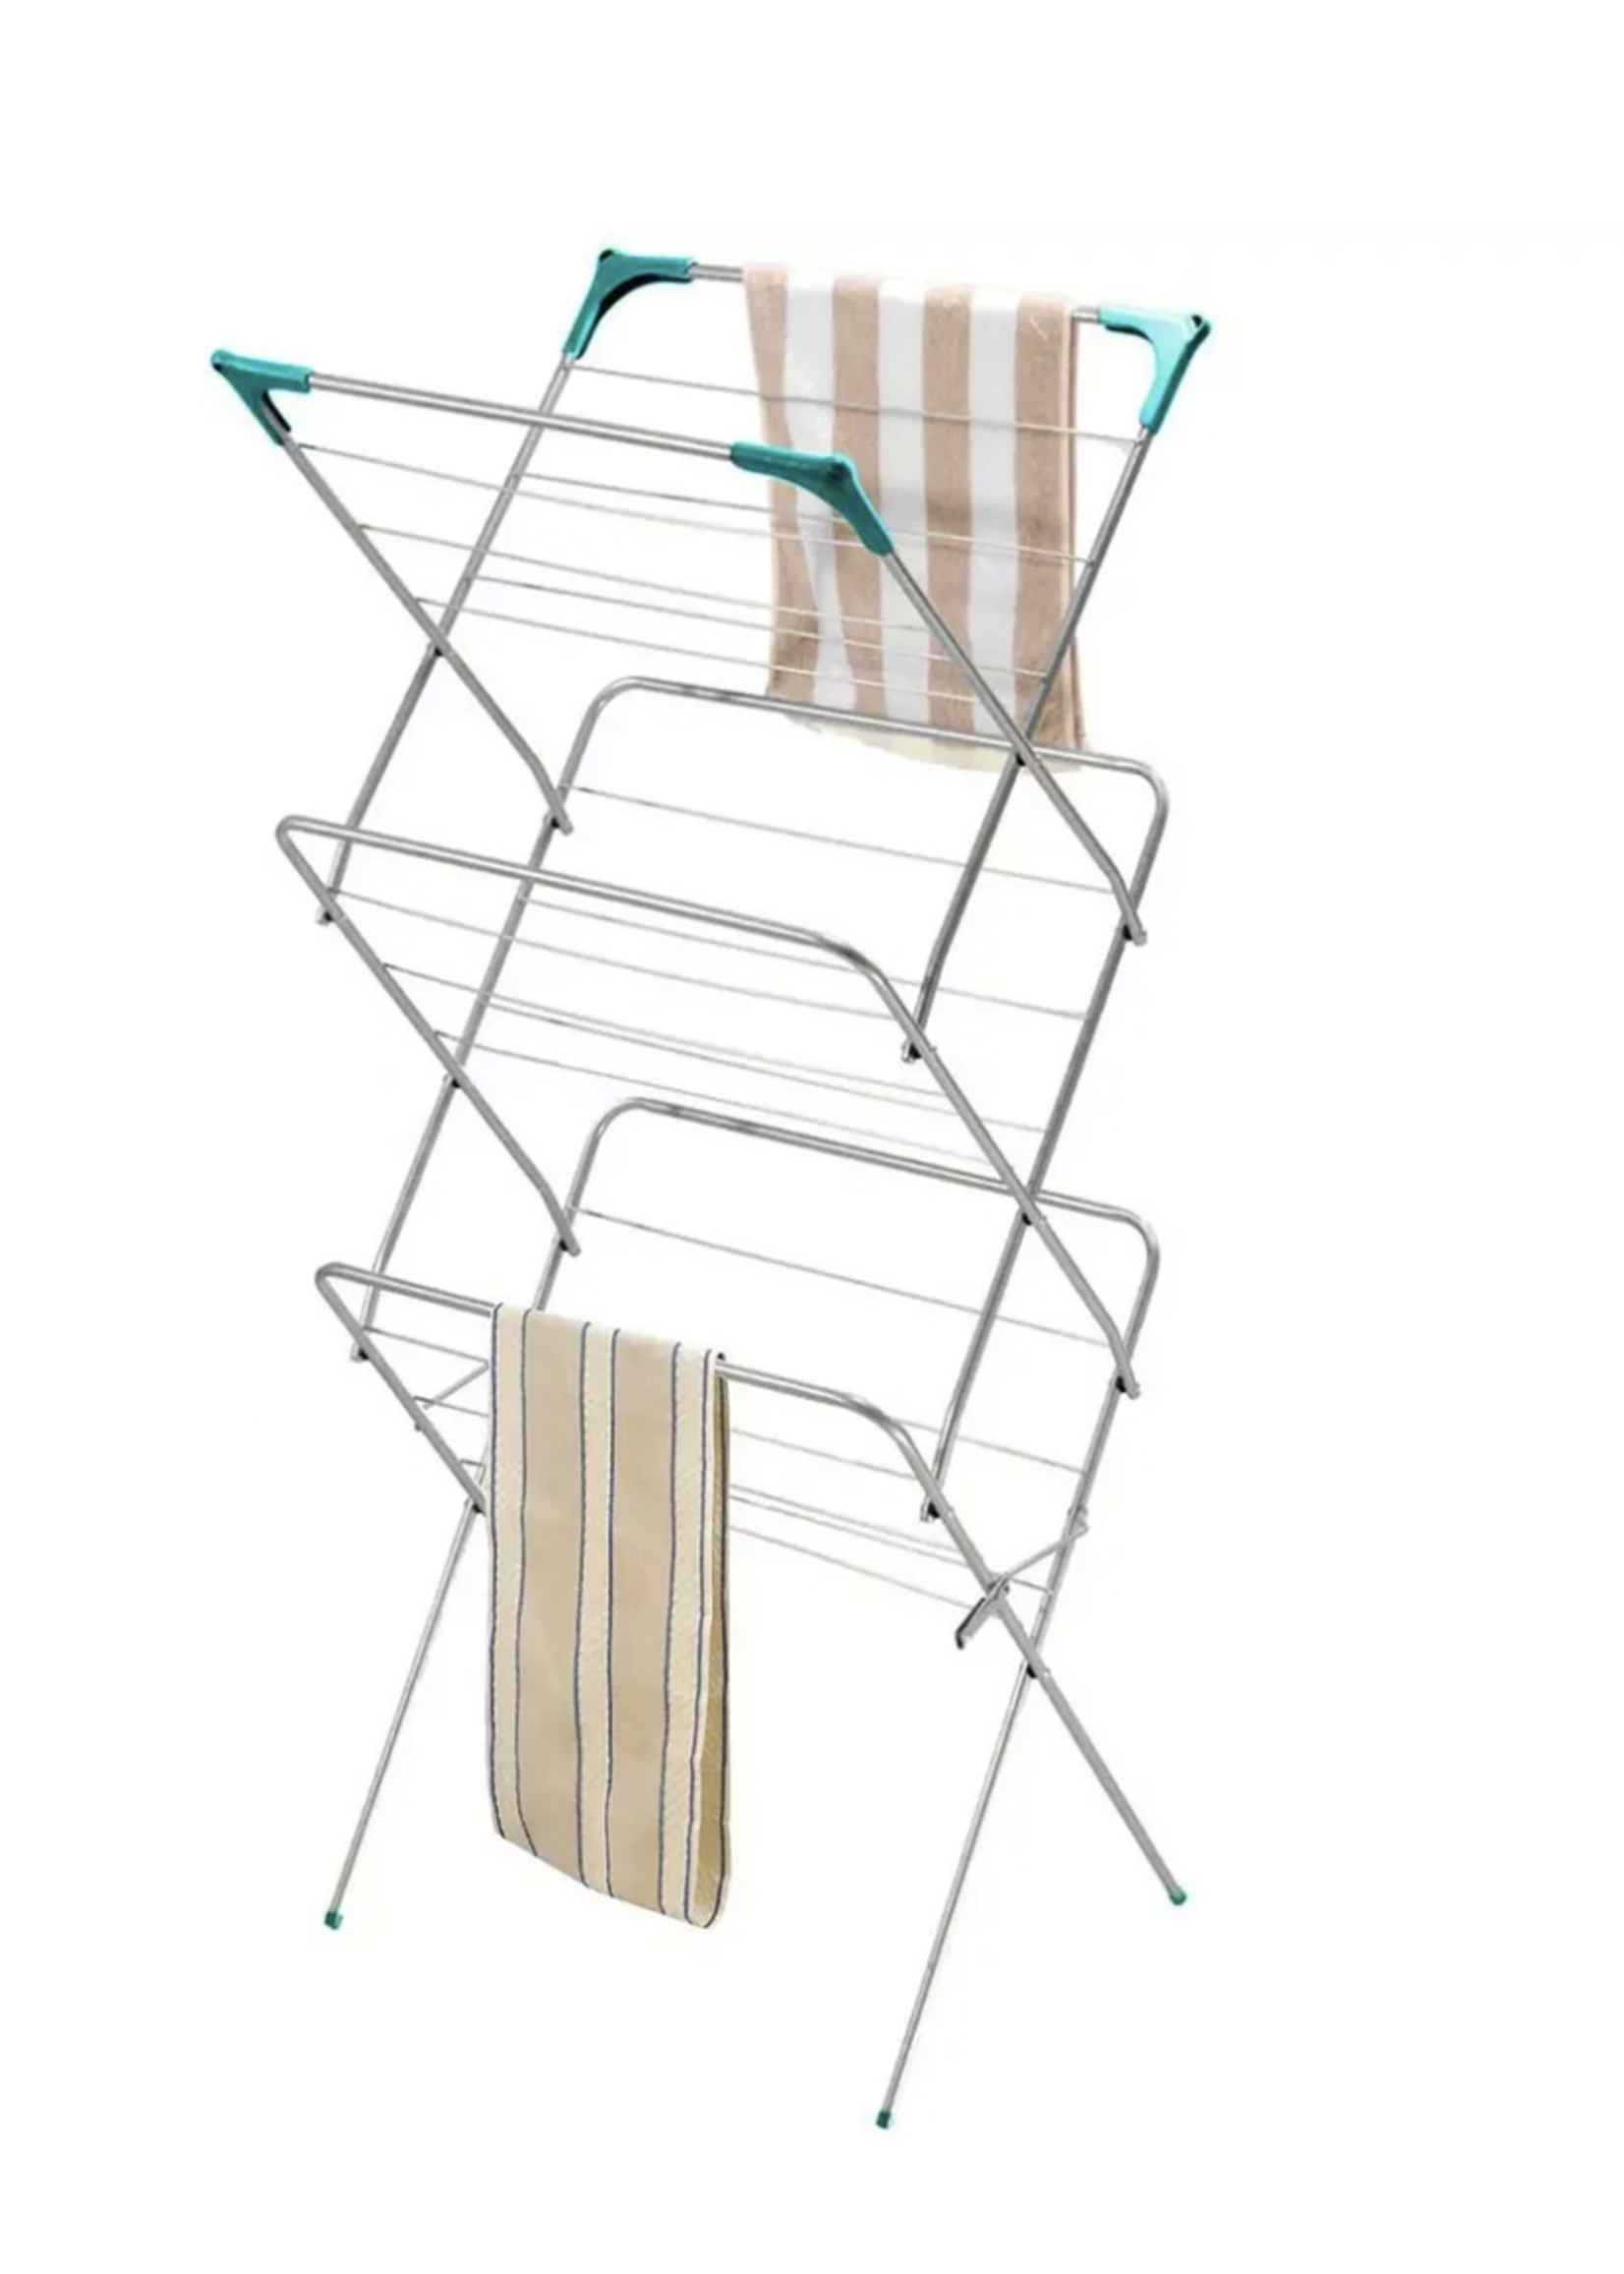 Kingfisher Kingfisher 3 Tier Clothes Airer